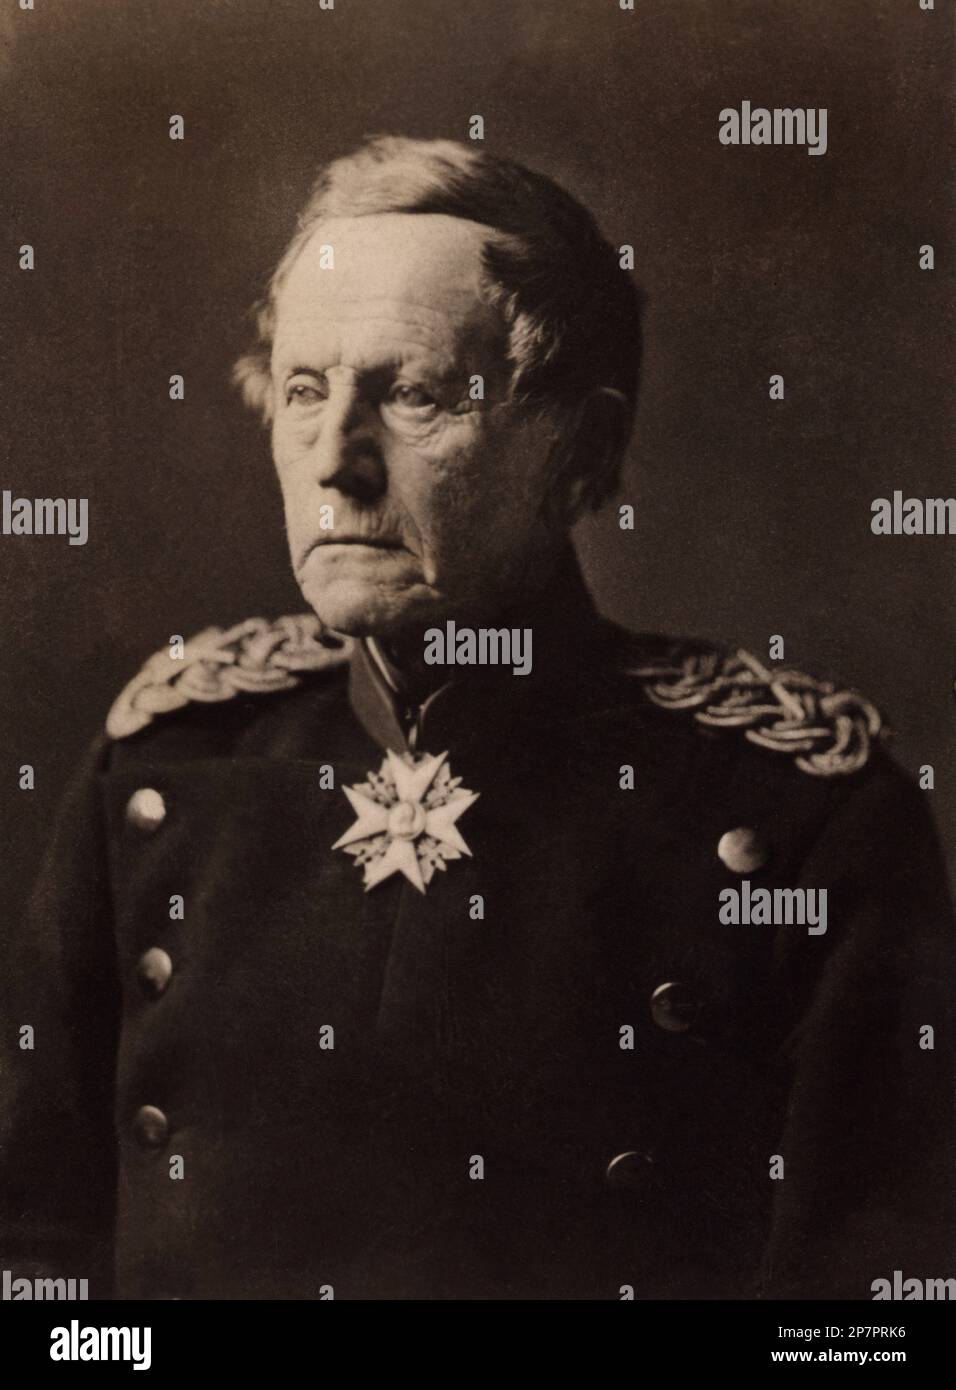 1890 c, GERMANY : Generalfeldmarschall Helmuth, Graf VON MOLTKE  ( known as Helmuth Karl Bernhard von Moltke before 1870 ) ( 1800 –  1891 ), was a German Field Marshal, thirty years chief of the staff of the Prussian army, widely regarded as one of the great strategists of the latter half of the 1800s, and the creator of a new, more modern method, of directing armies in the field. He is often referred to as Moltke the Elder to distinguish him from his nephew Helmuth Johann Ludwig von Moltke, who commanded the German army at the outbreak of World War I .- PRUSSIA  - POLITICO - POLITICA - POLITI Stock Photo